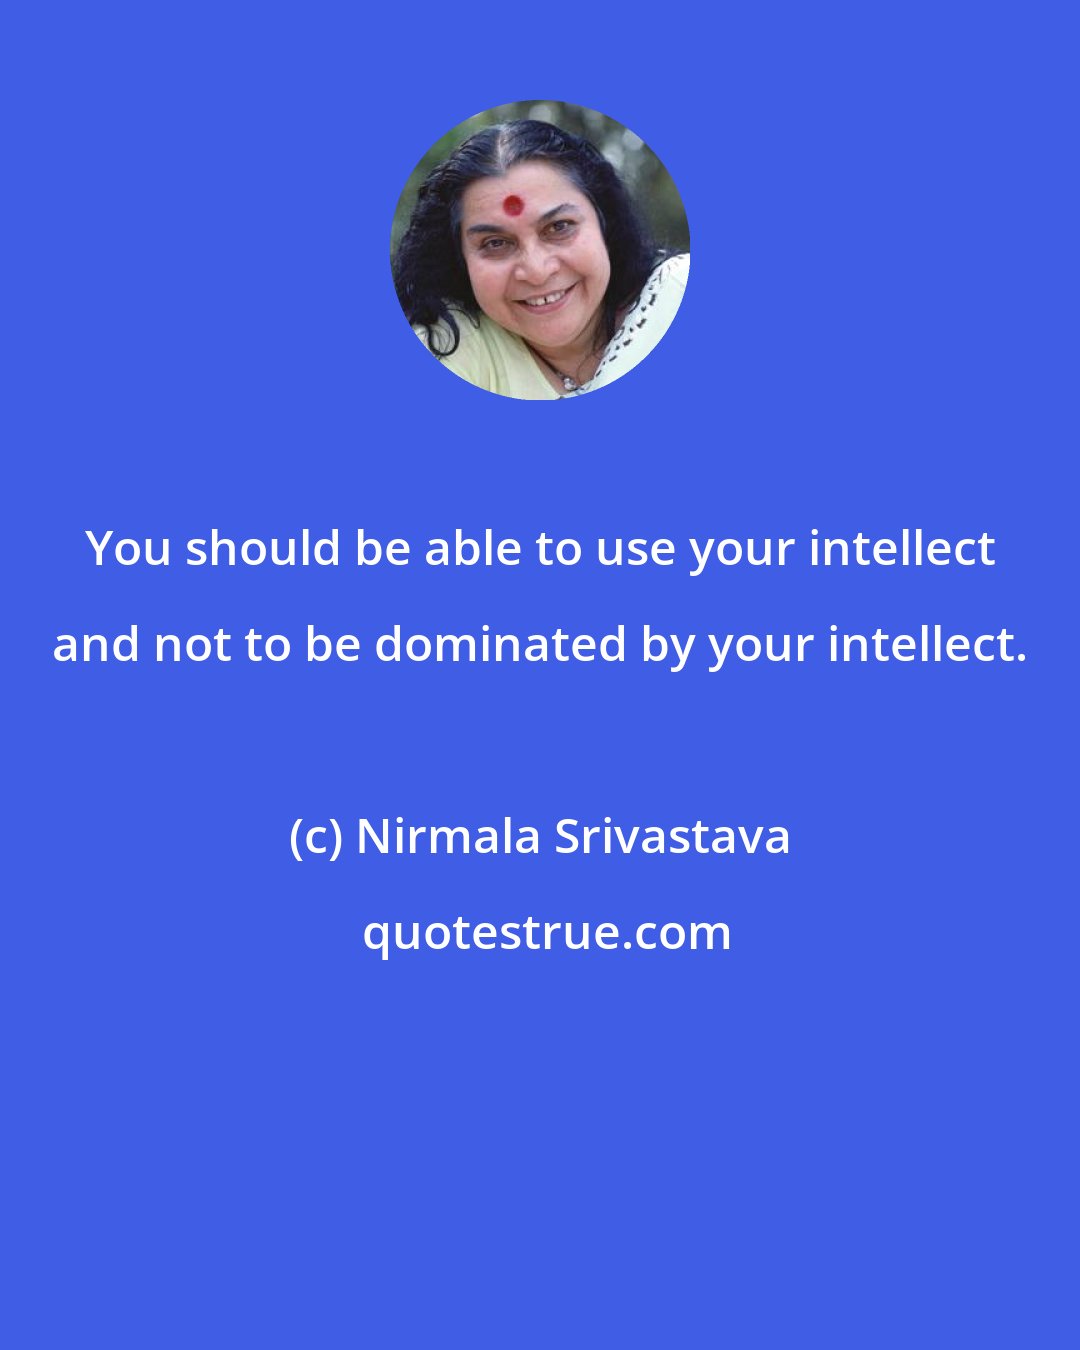 Nirmala Srivastava: You should be able to use your intellect and not to be dominated by your intellect.